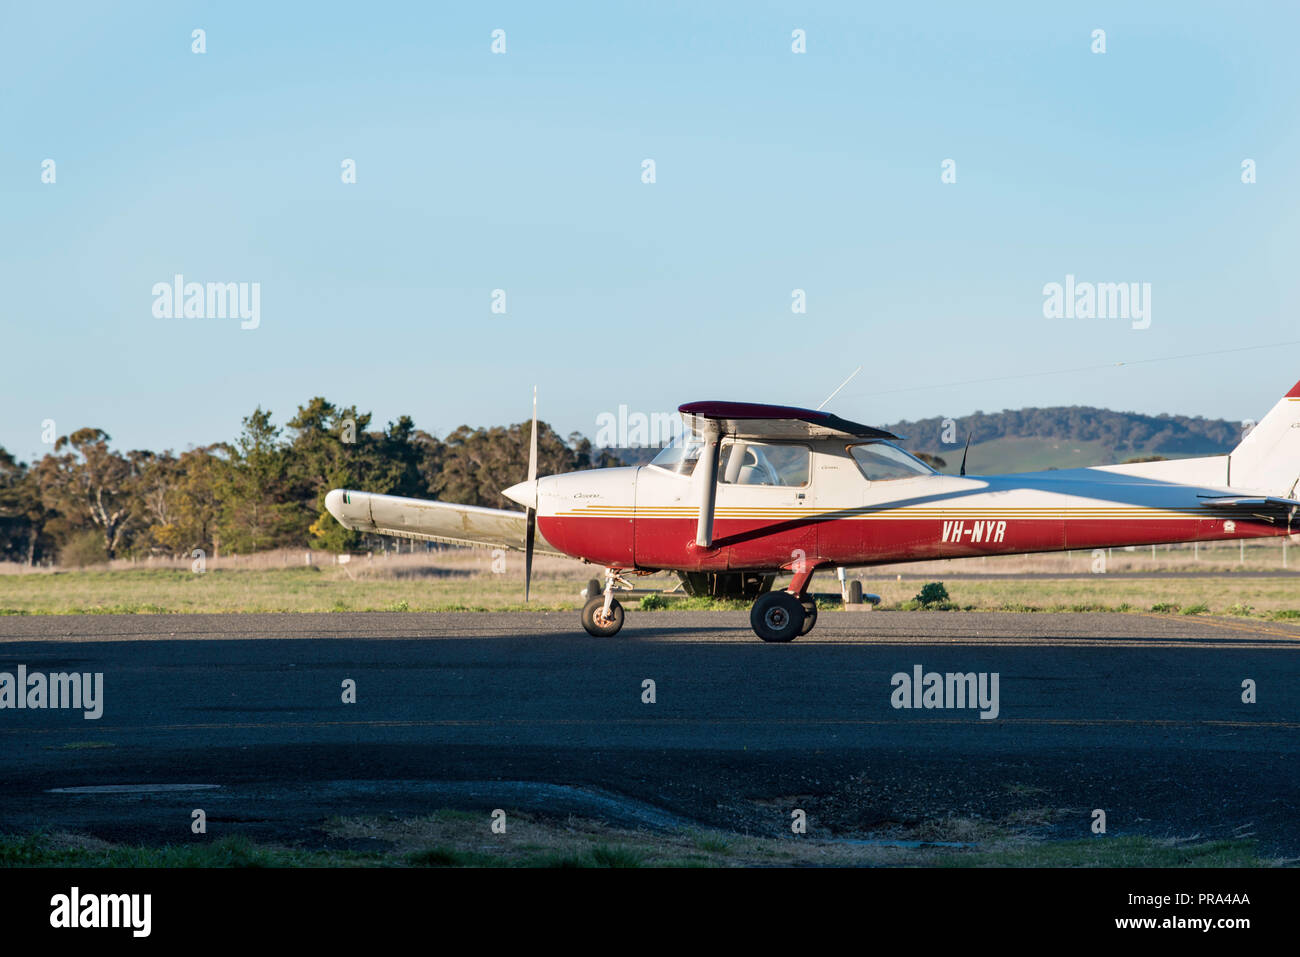 Orange Regional Airport is located in the Central Tablelands region of New South Wales between the city of Orange and the town of Blayney in Australia Stock Photo